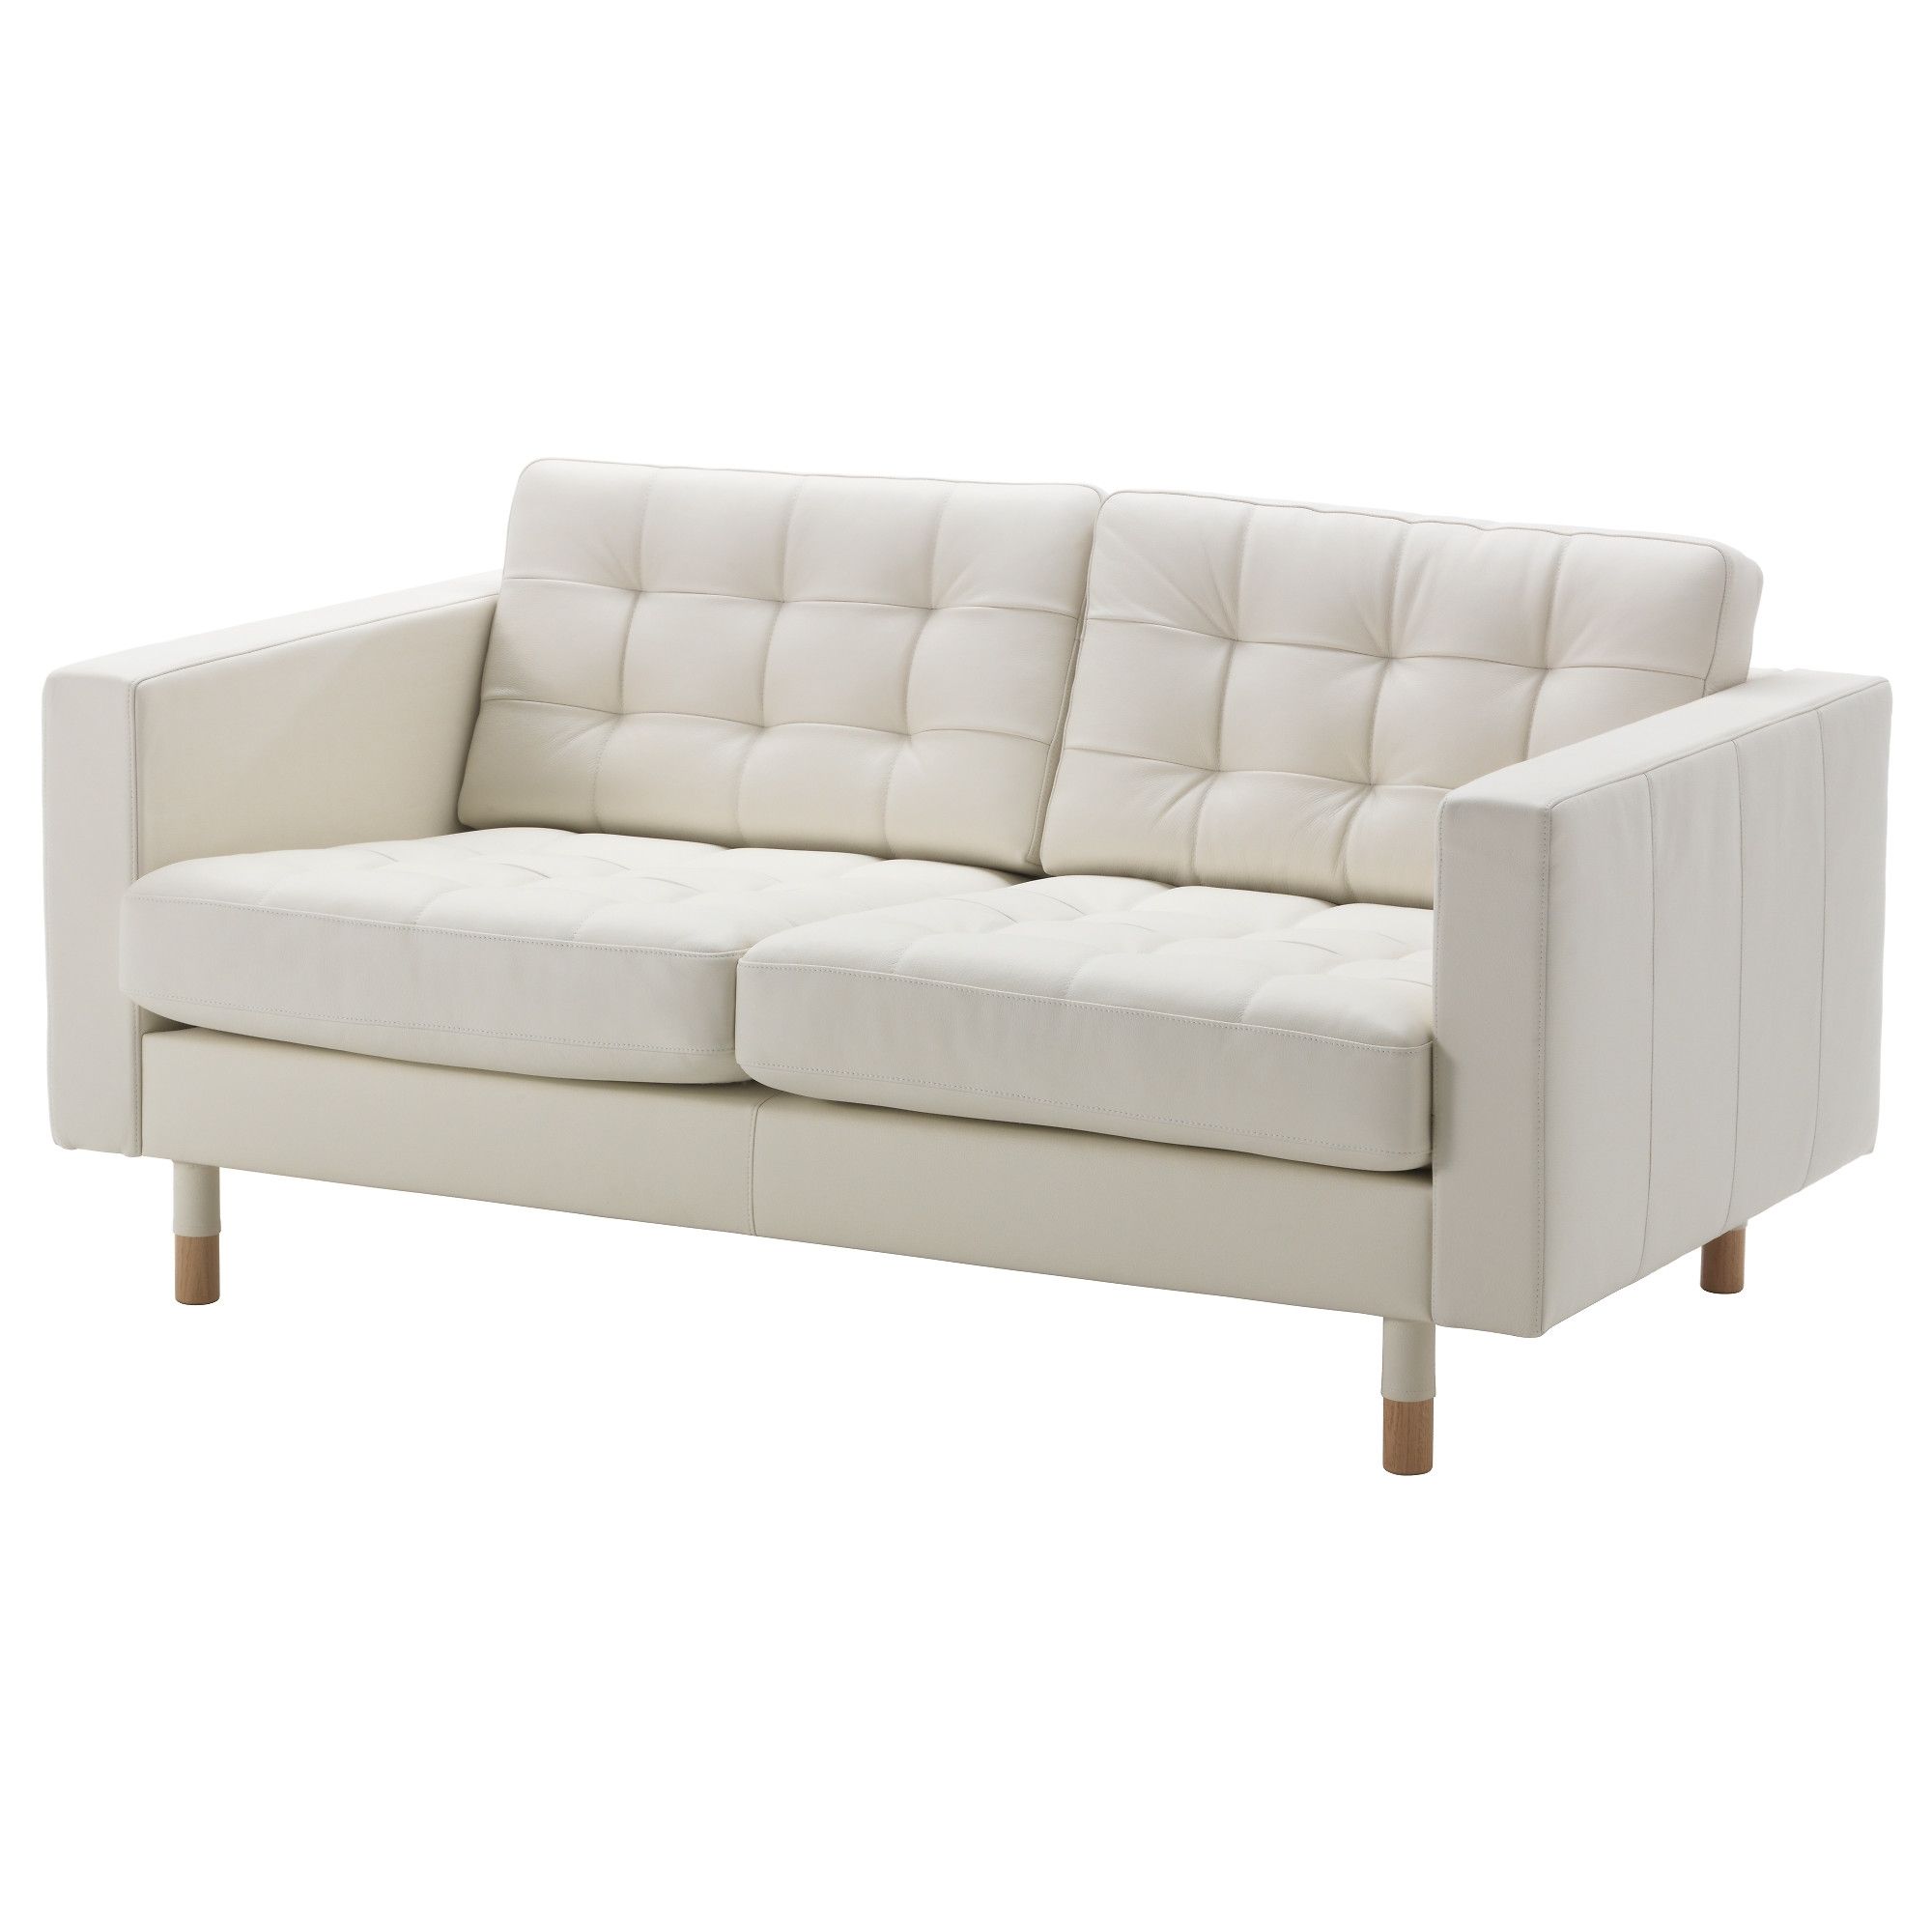 Landskrona Loveseat – Grann/bomstad White, Wood – Ikea For Ikea Small Sofas (View 7 of 10)